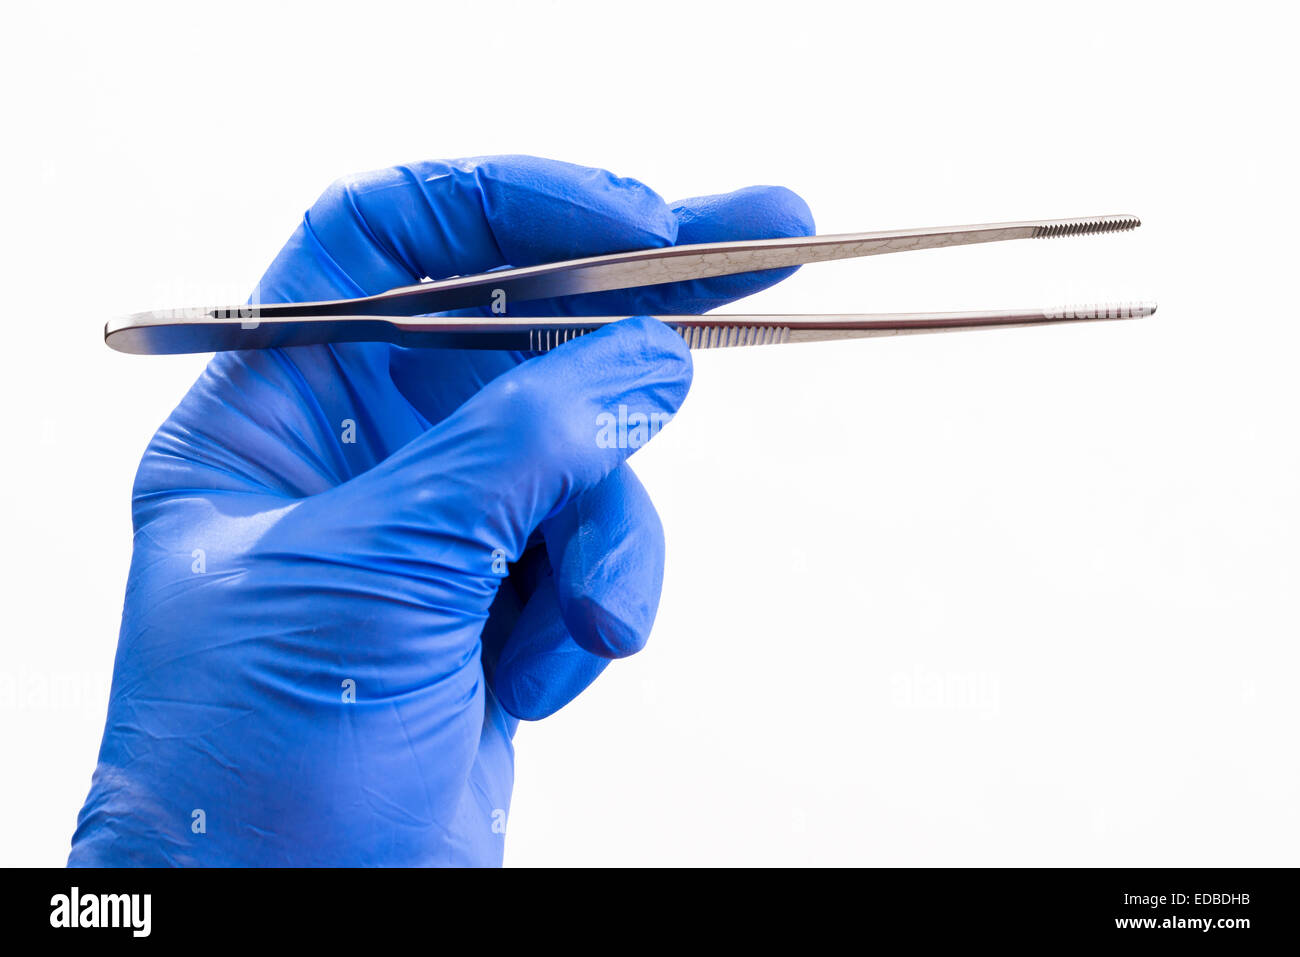 A hand with a blue medical glove is holding tweezers Stock Photo